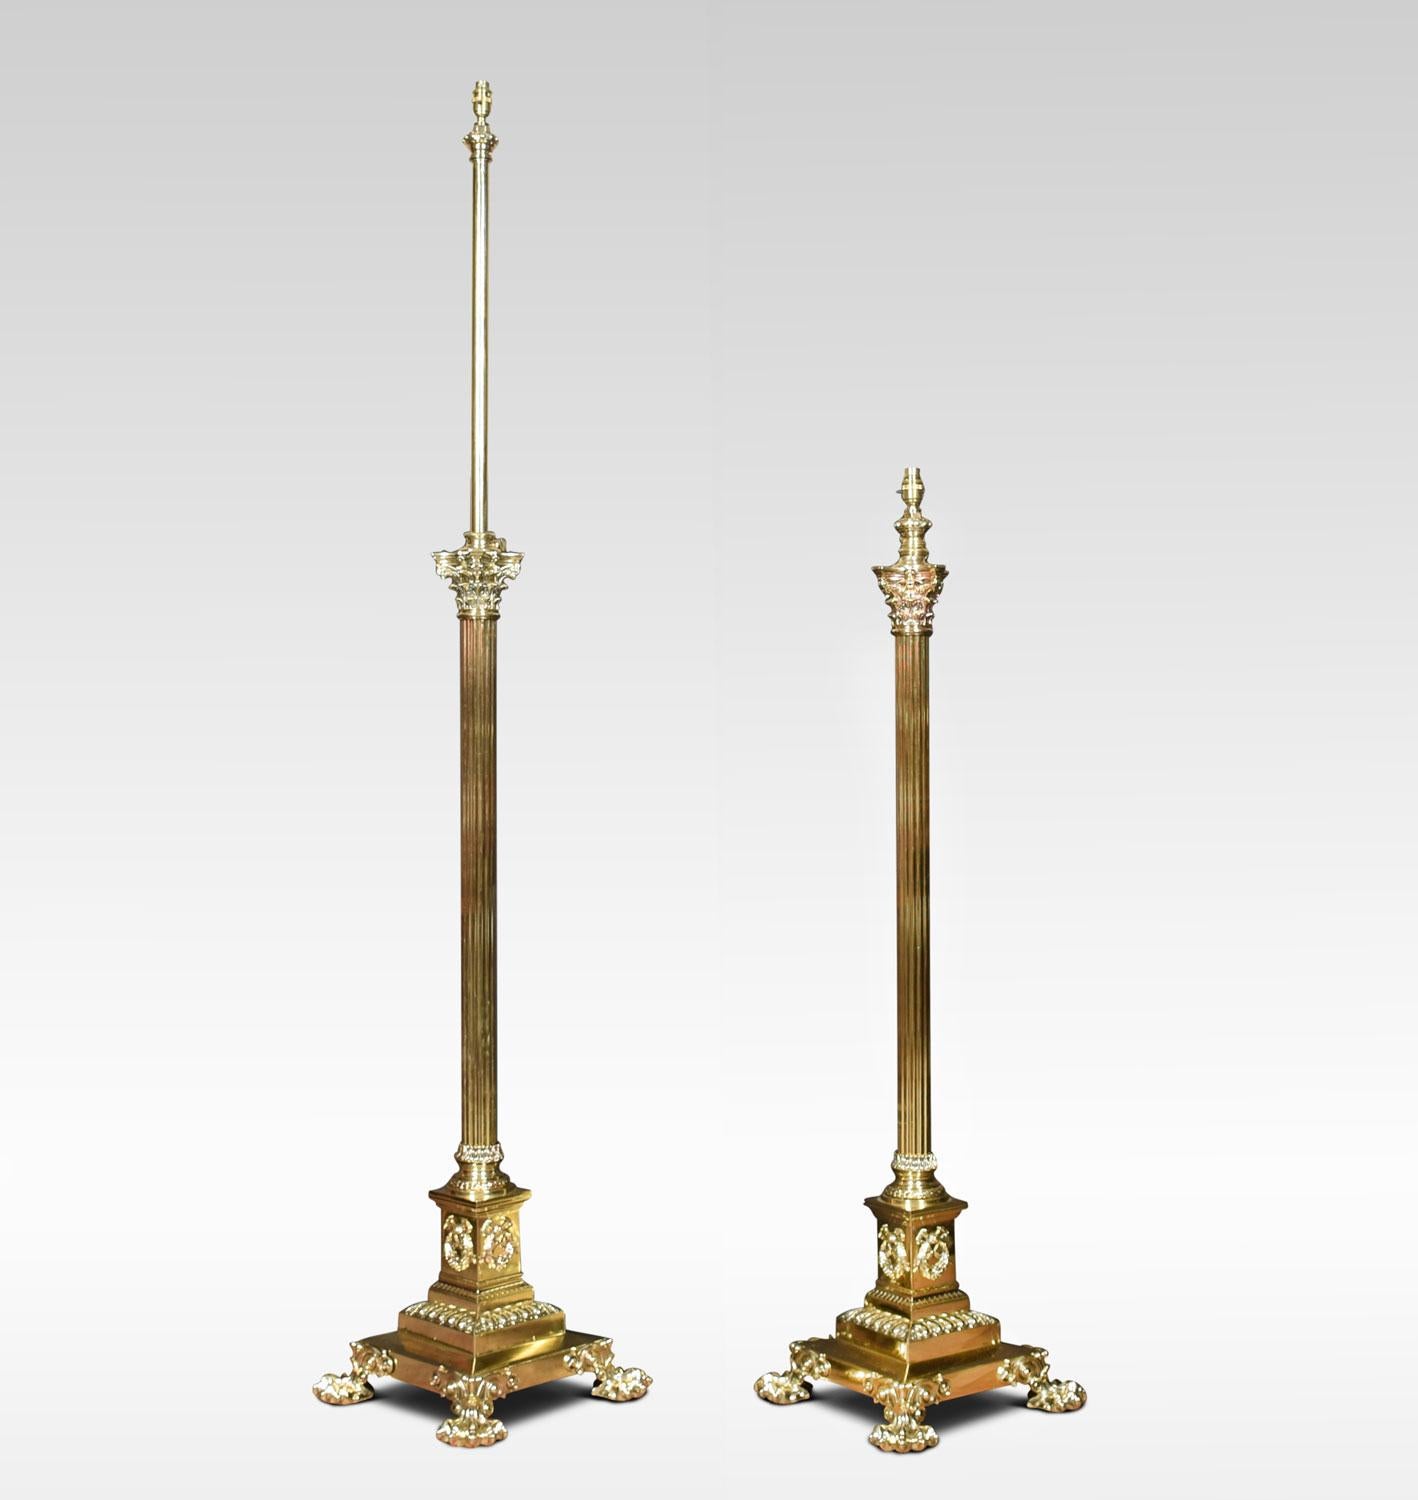 Pair of exhibition quality Victorian brass standard lamps. Having Corinthian column and adjustable stem, on large stepped square base with paw feet. The lamps have been rewired.
Dimensions:
Height 54 inches adjustable
Width 15 inches
Depth 15